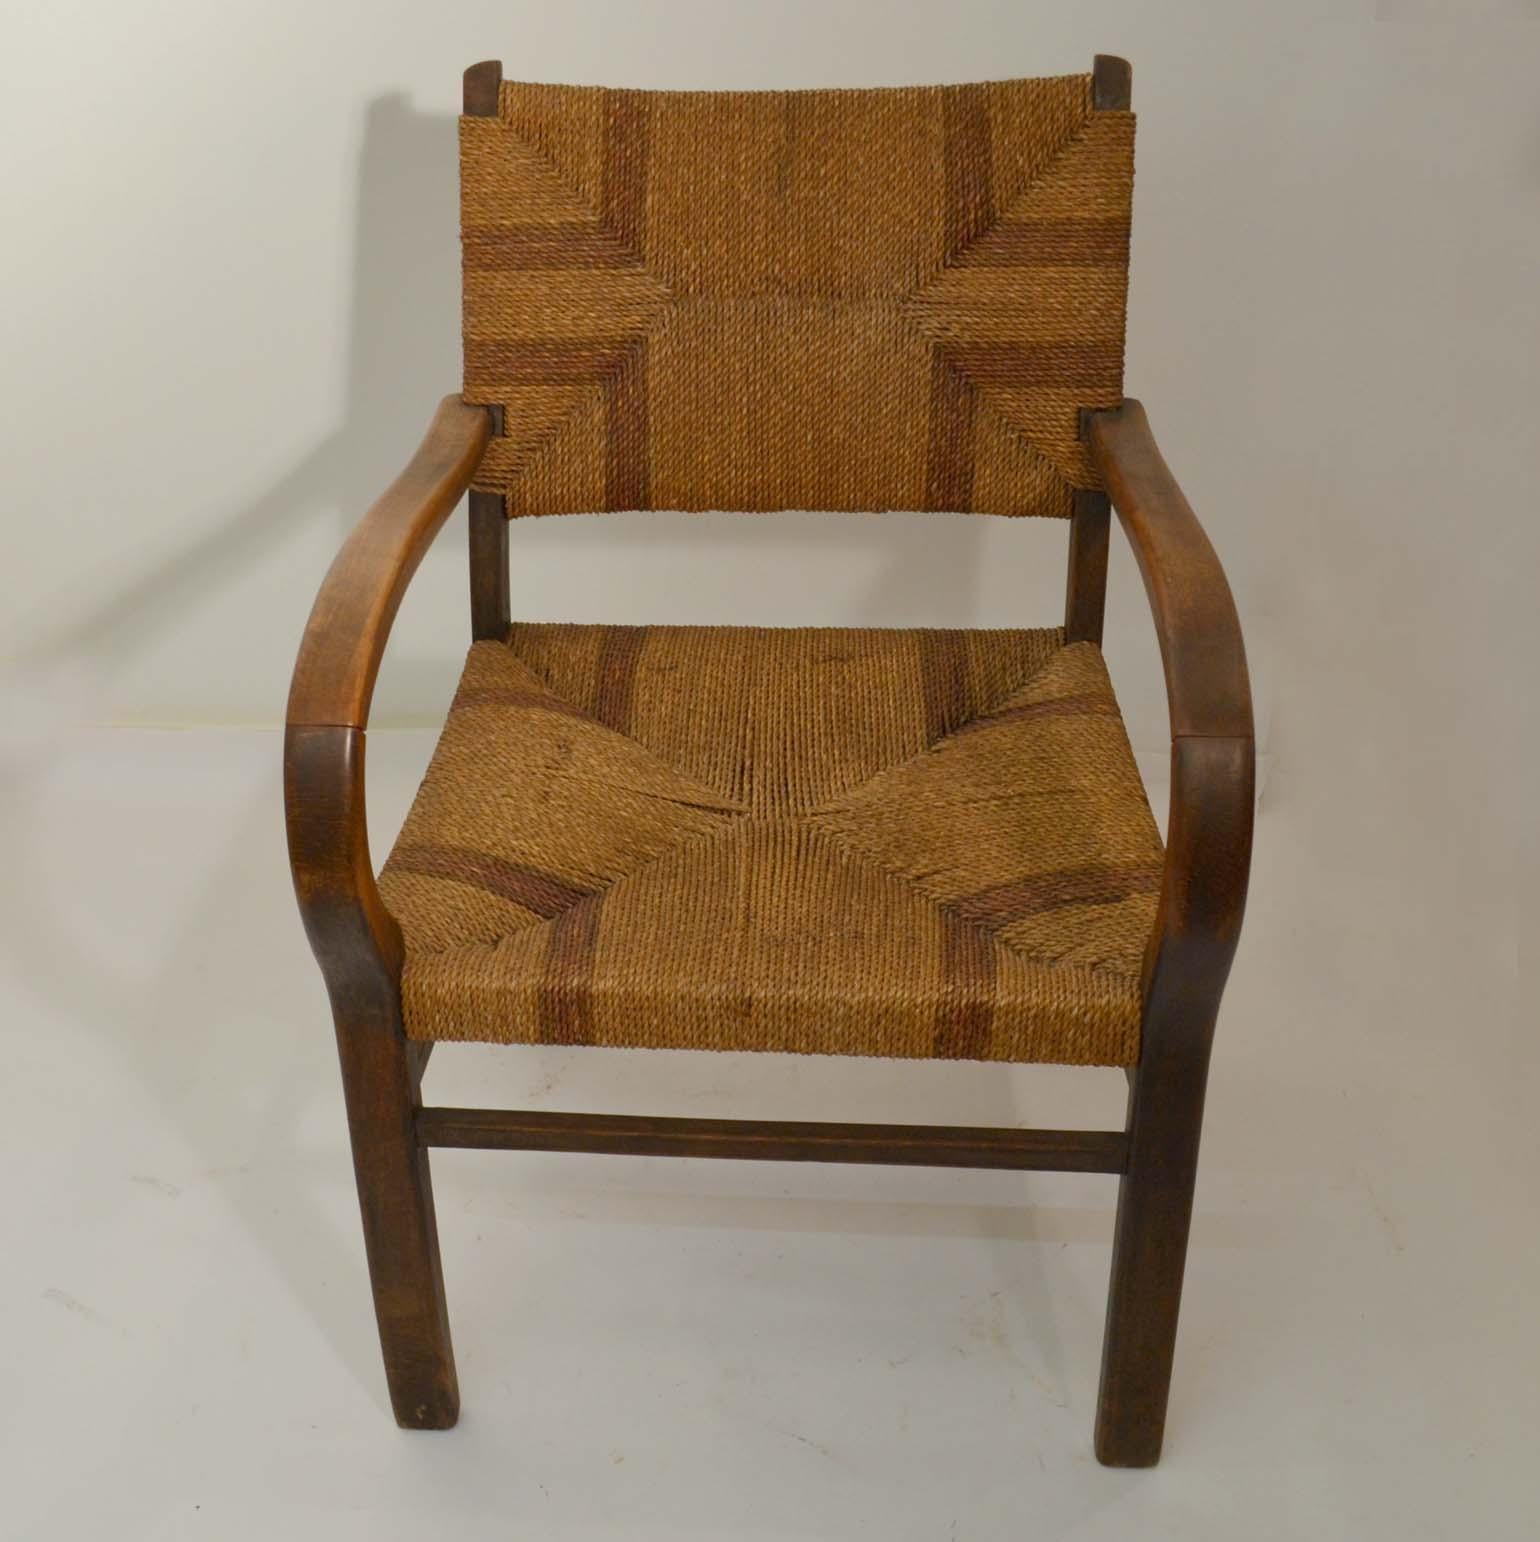 A pair of Bauhaus beech wood and two-tone woven seagrass rope armchairs, by Erich Dieckmann (1896-1944), circa 1925-1930. The use of quality hardwoods, rope and cane matting moderated the austere geometry of the designs and this pair with the